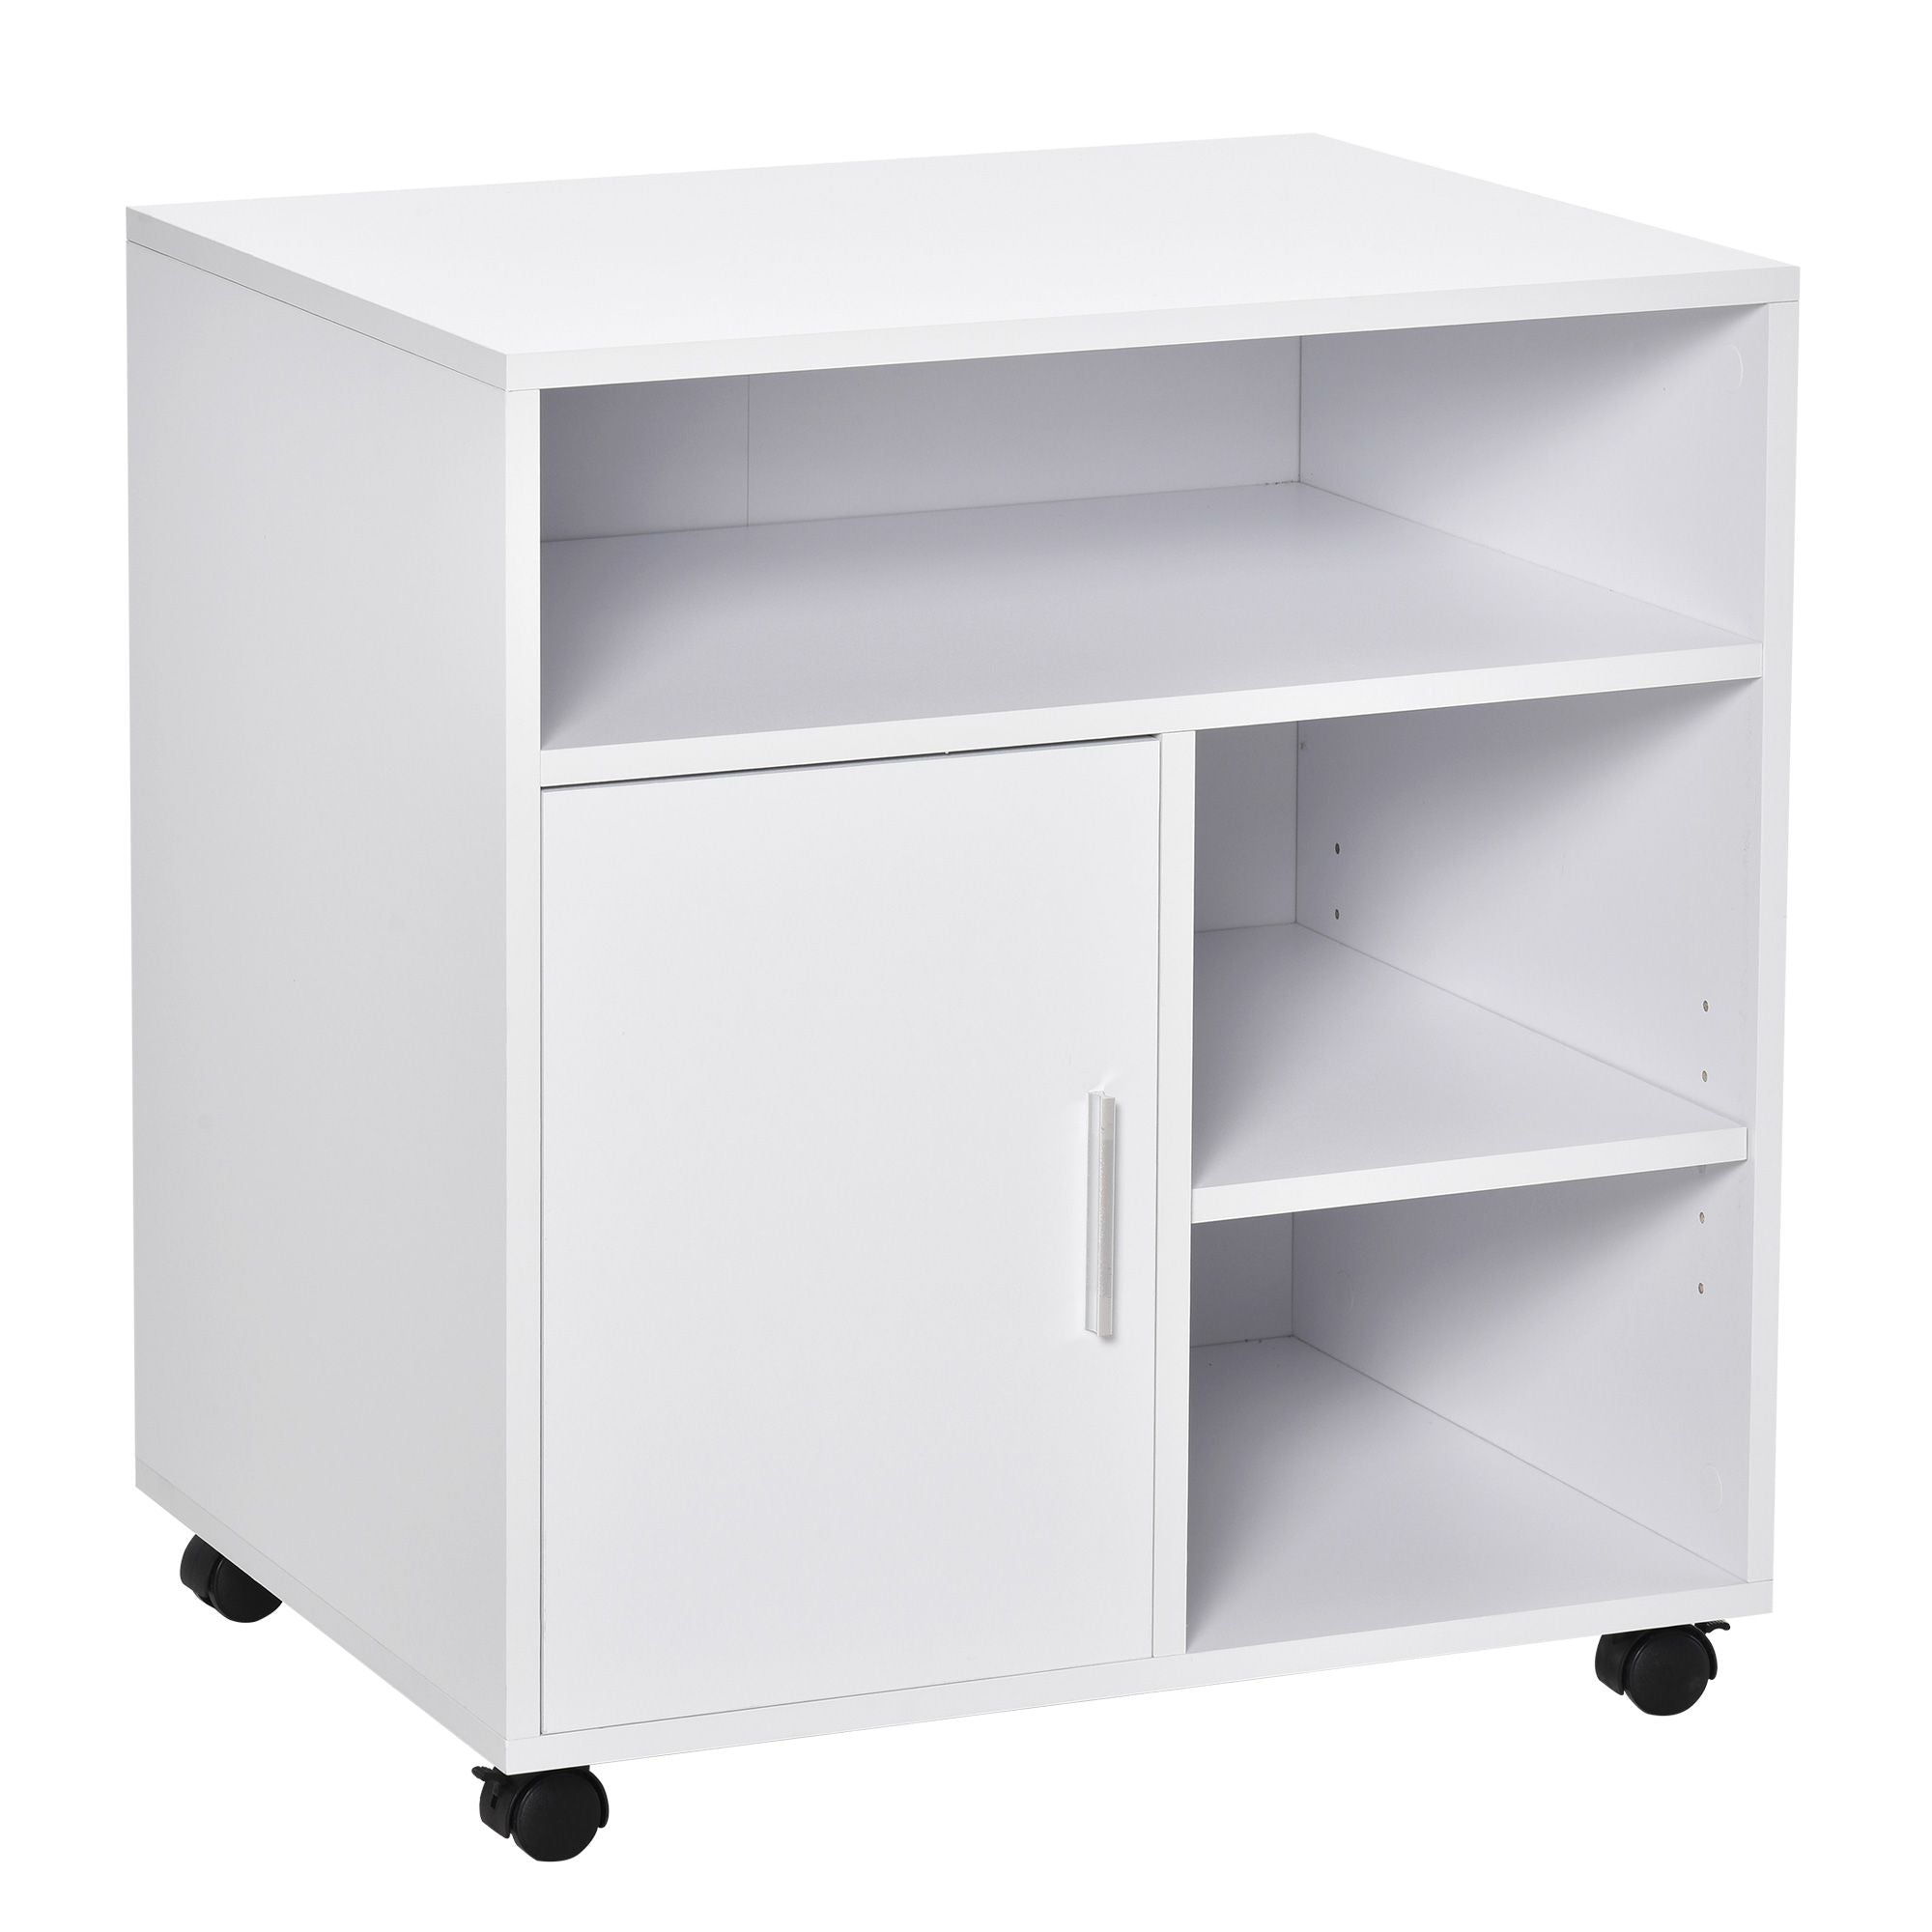 ProperAV Extra Particle Board 4-Compartment Storage Unit with Wheels (White)